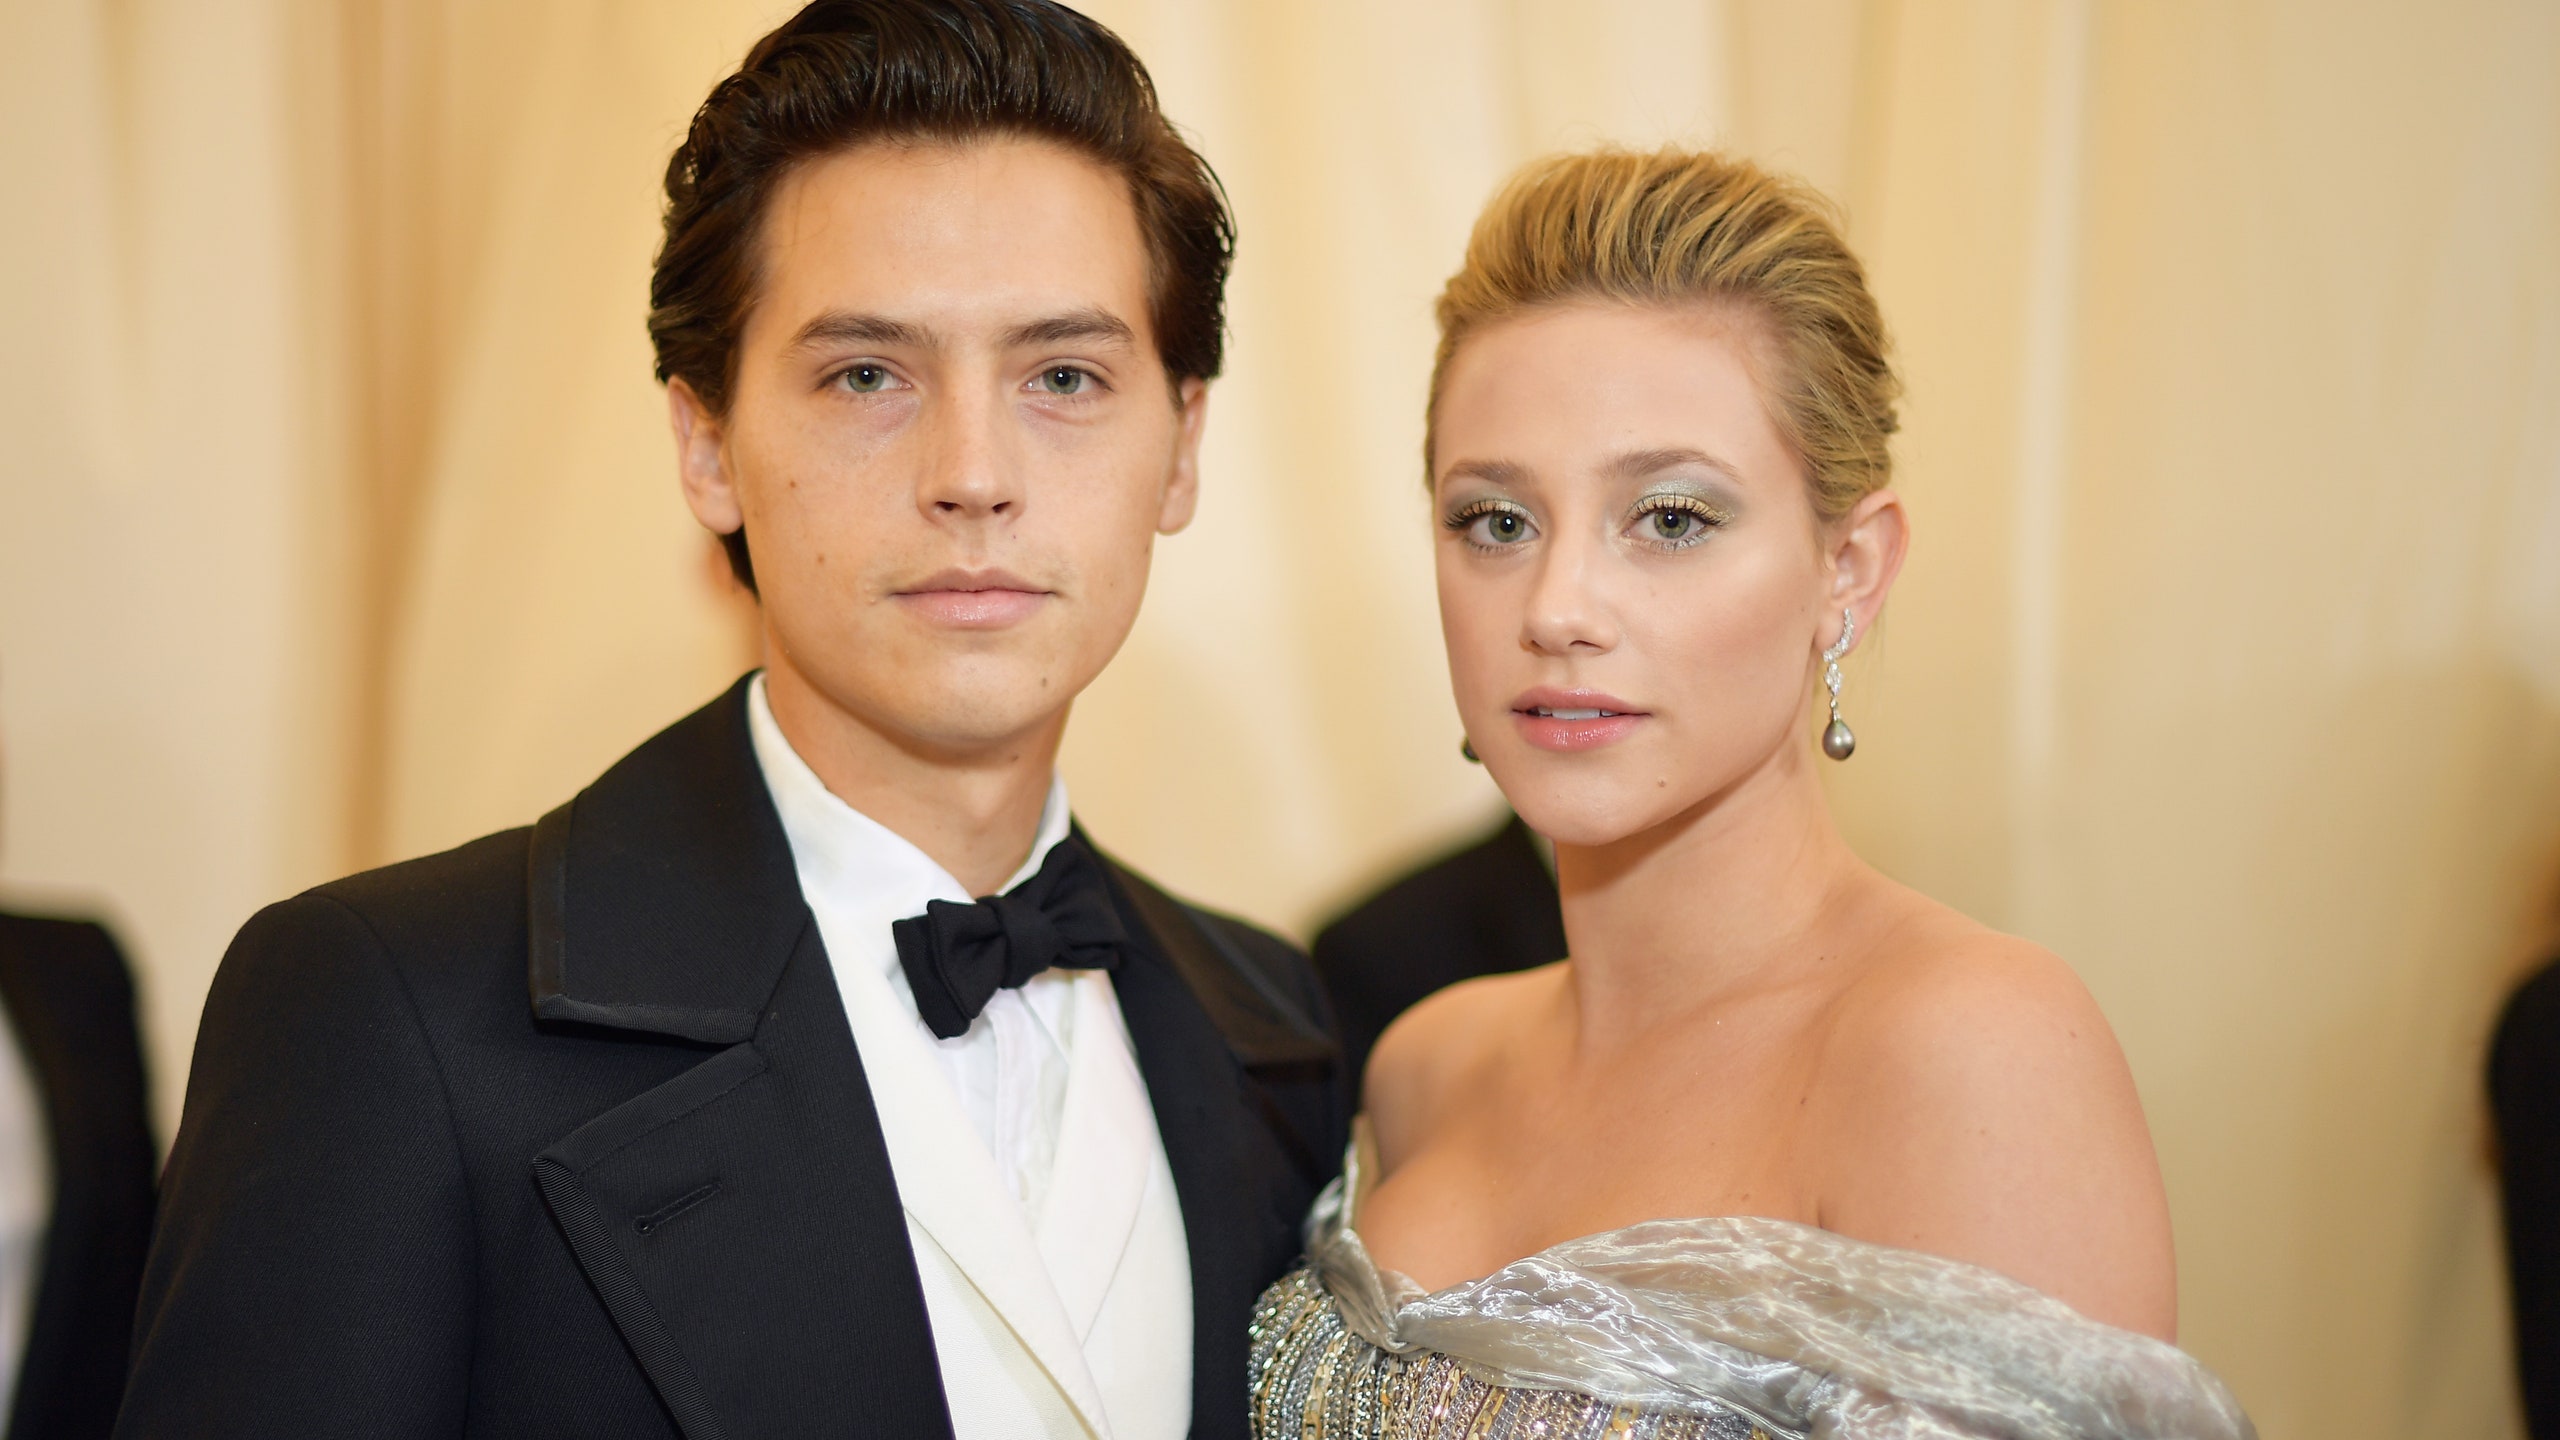 Lili Reinhart Seemingly Confirms Her Breakup With Cole Sprouse in New Interview